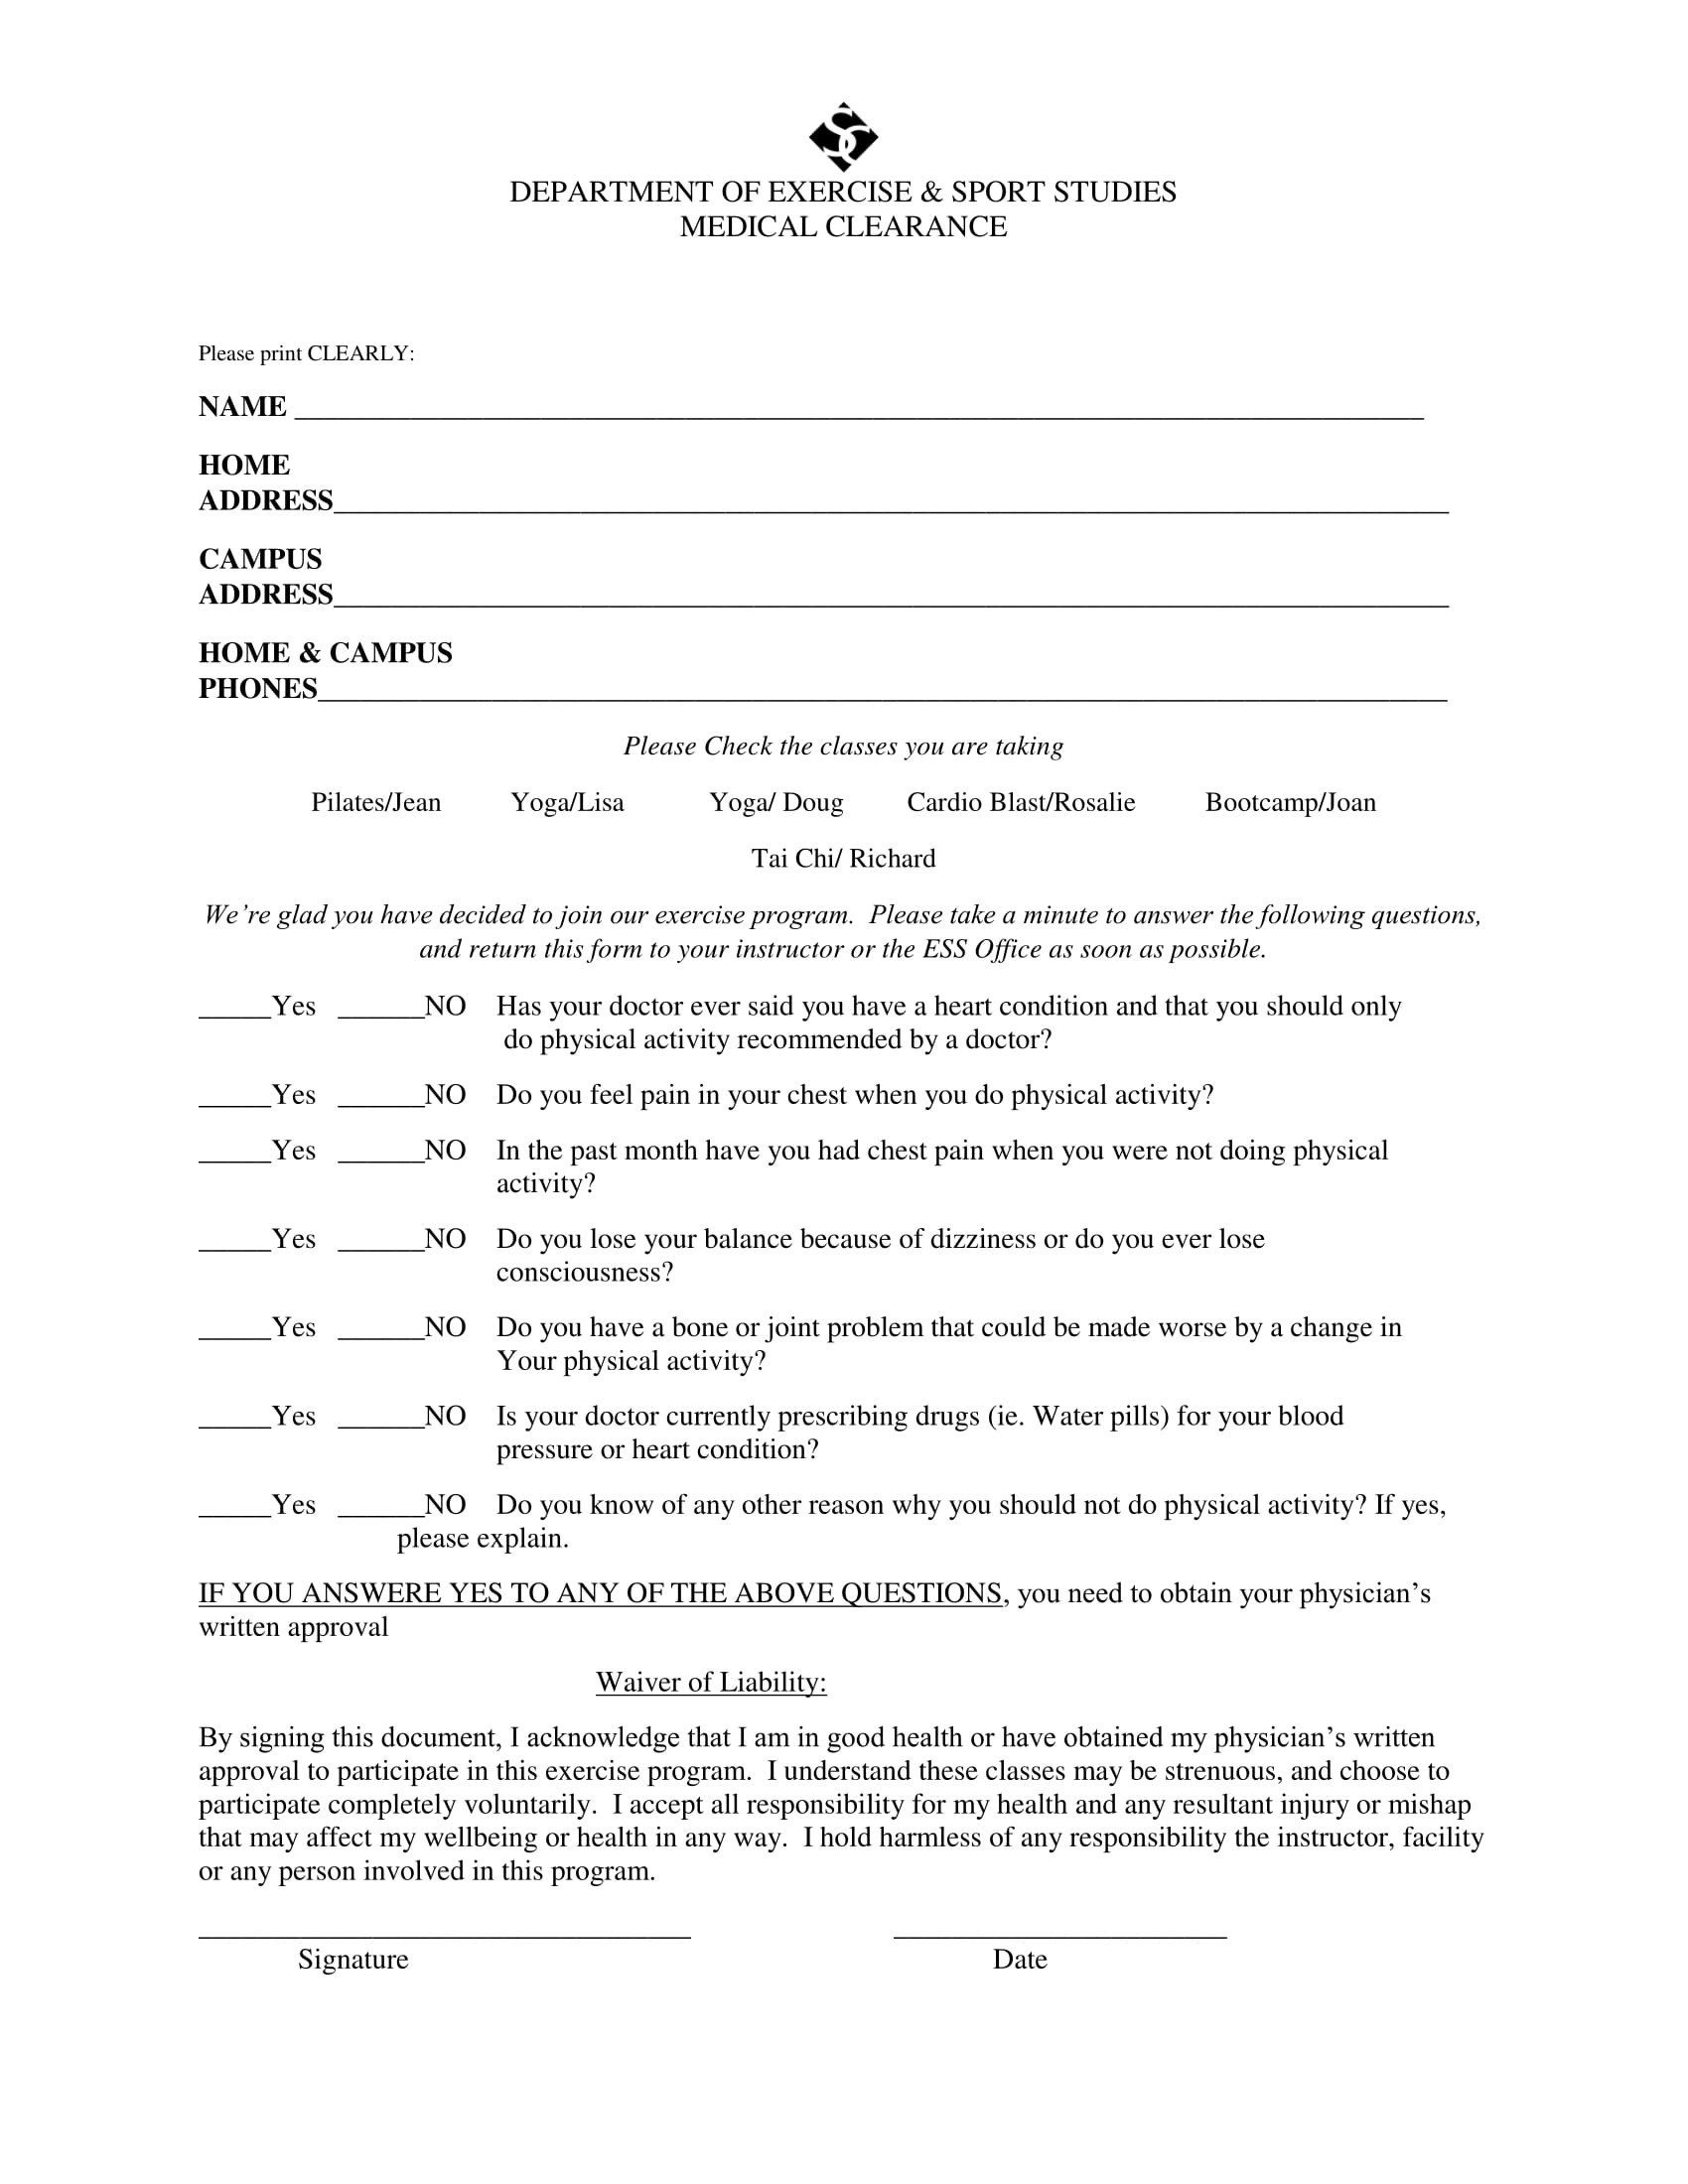 sports class medical clearance form 1